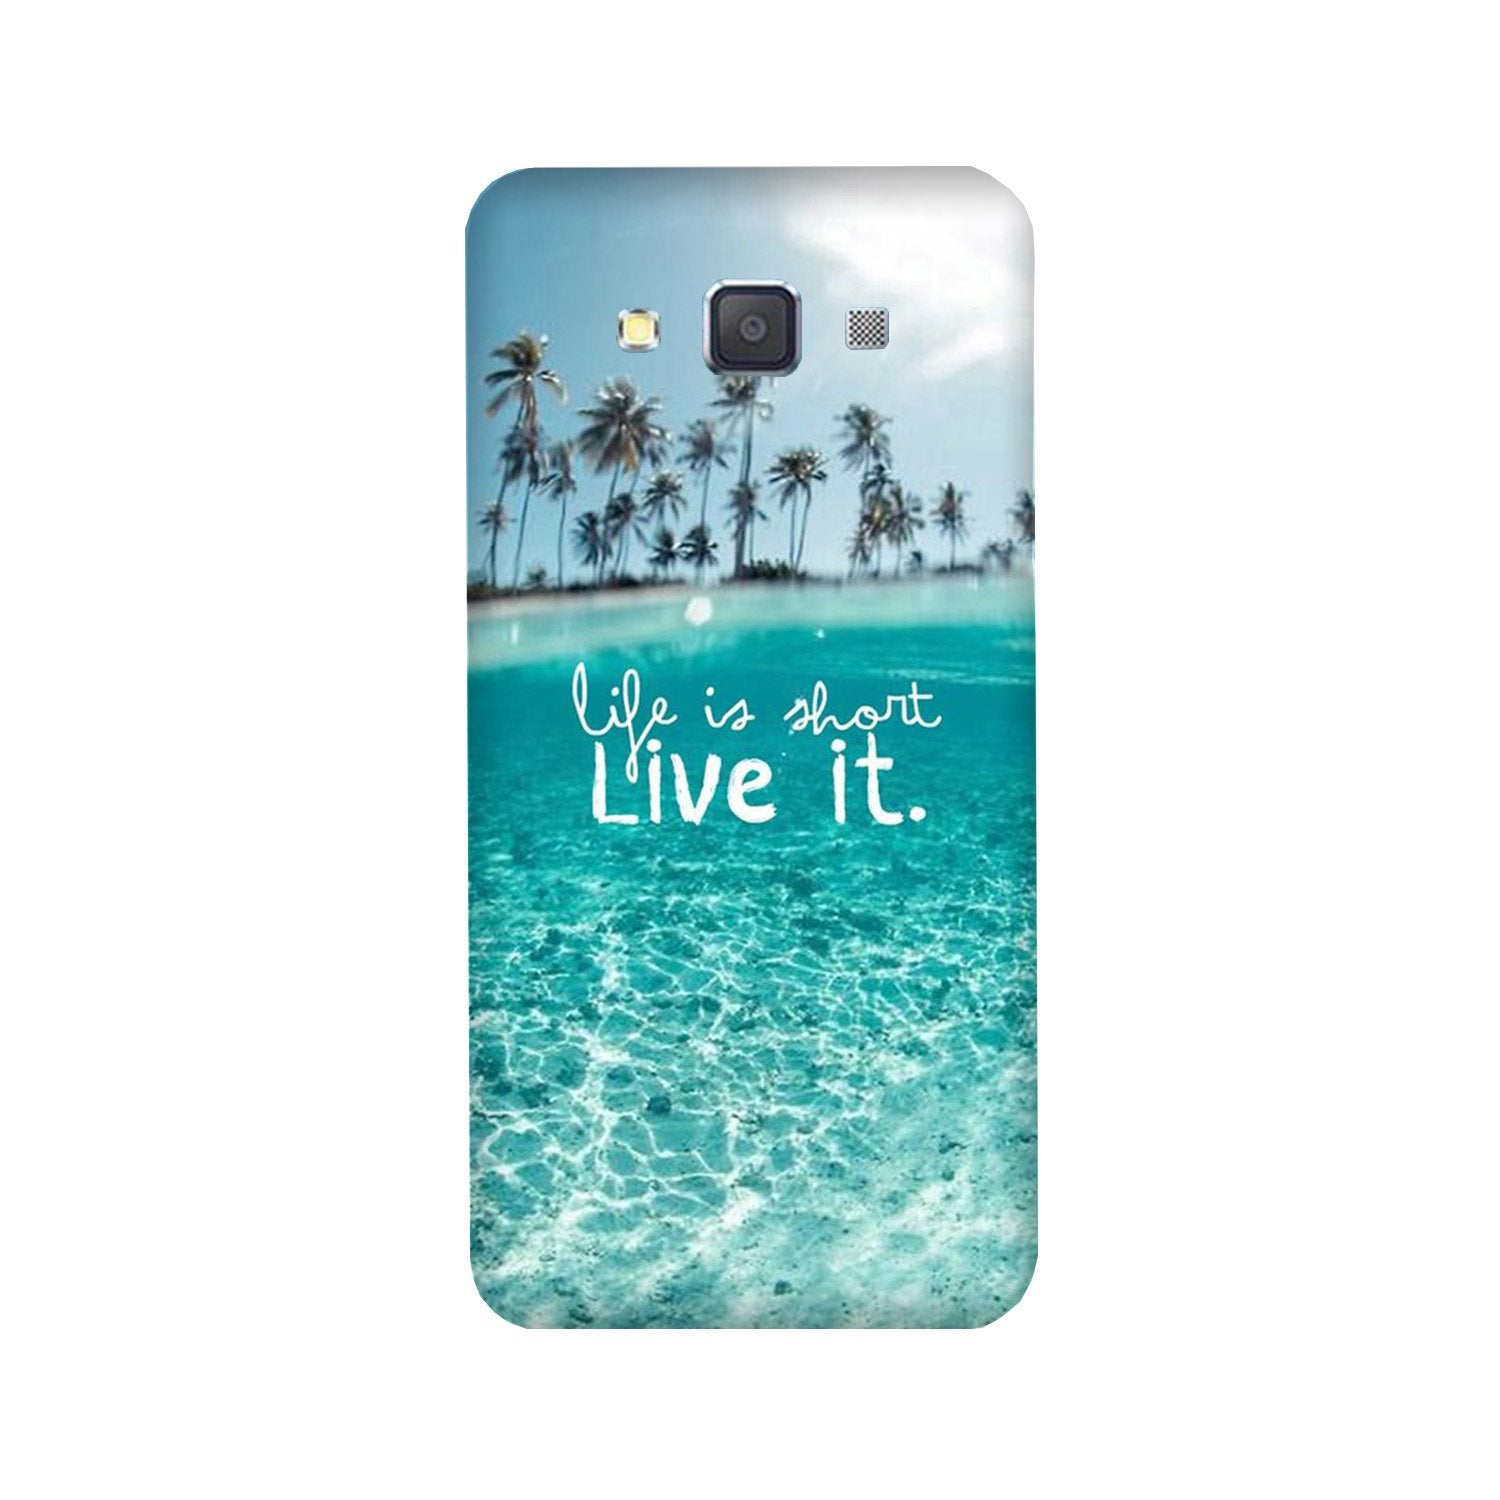 Life is short live it Case for Galaxy A5 (2015)